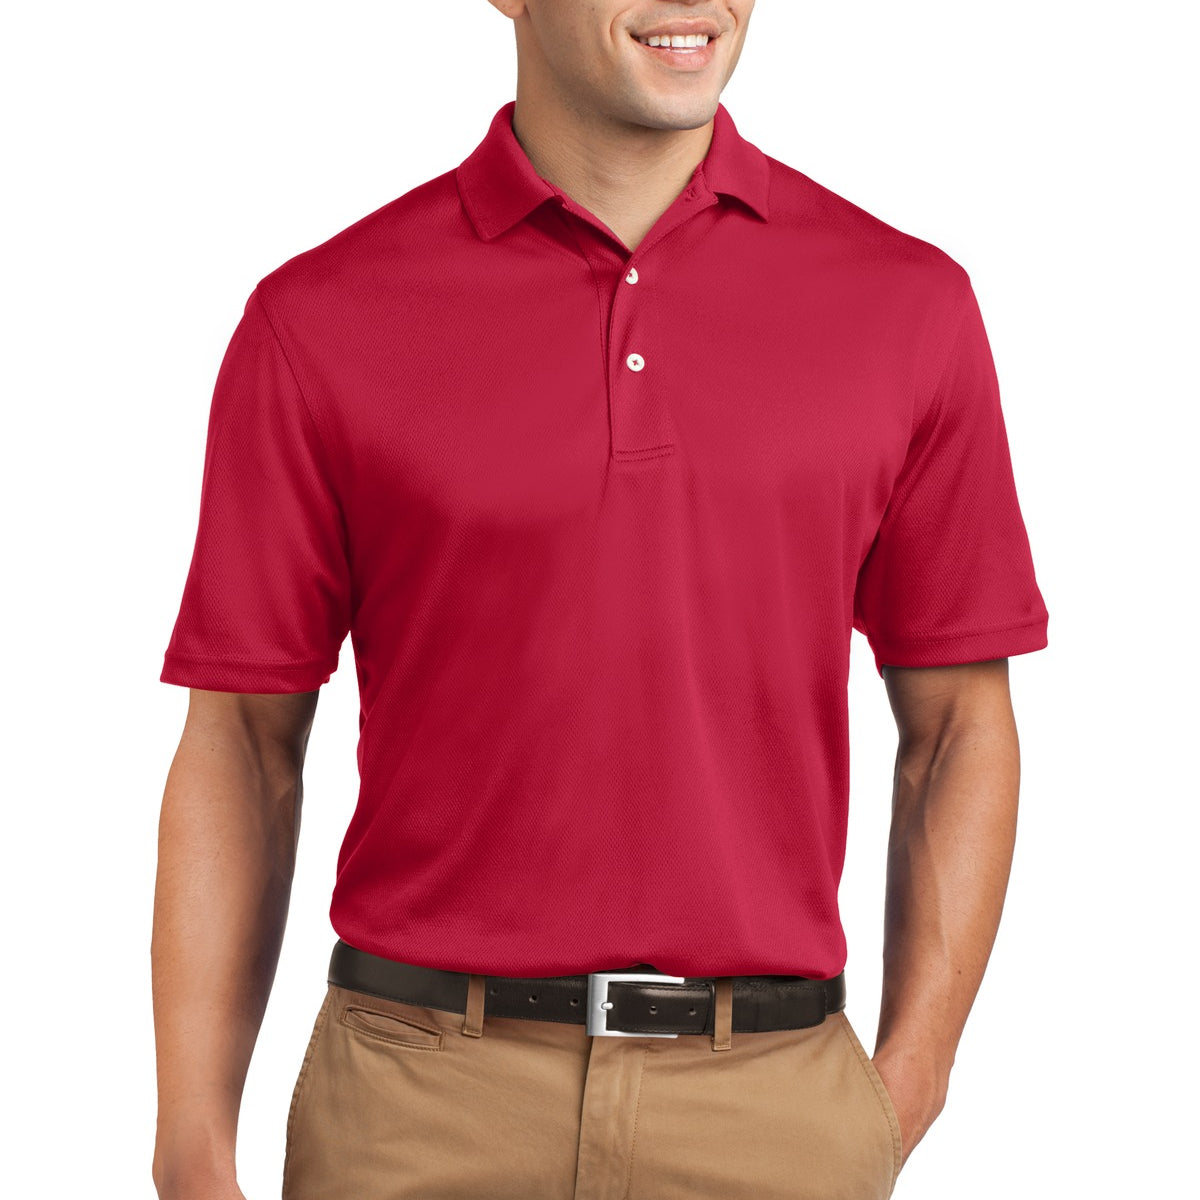 K469-Red-XS